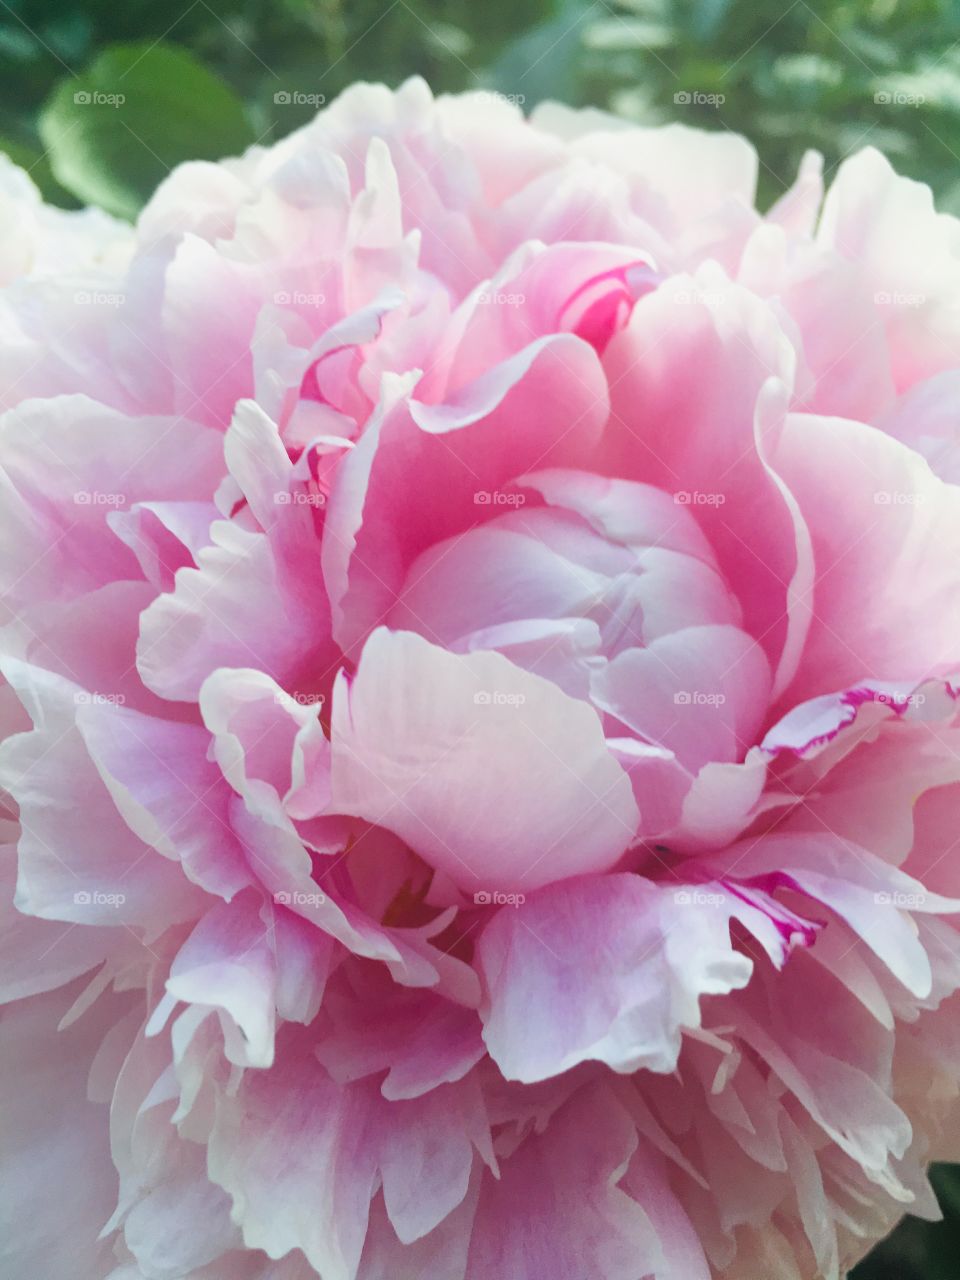 Layers of Pink Peony